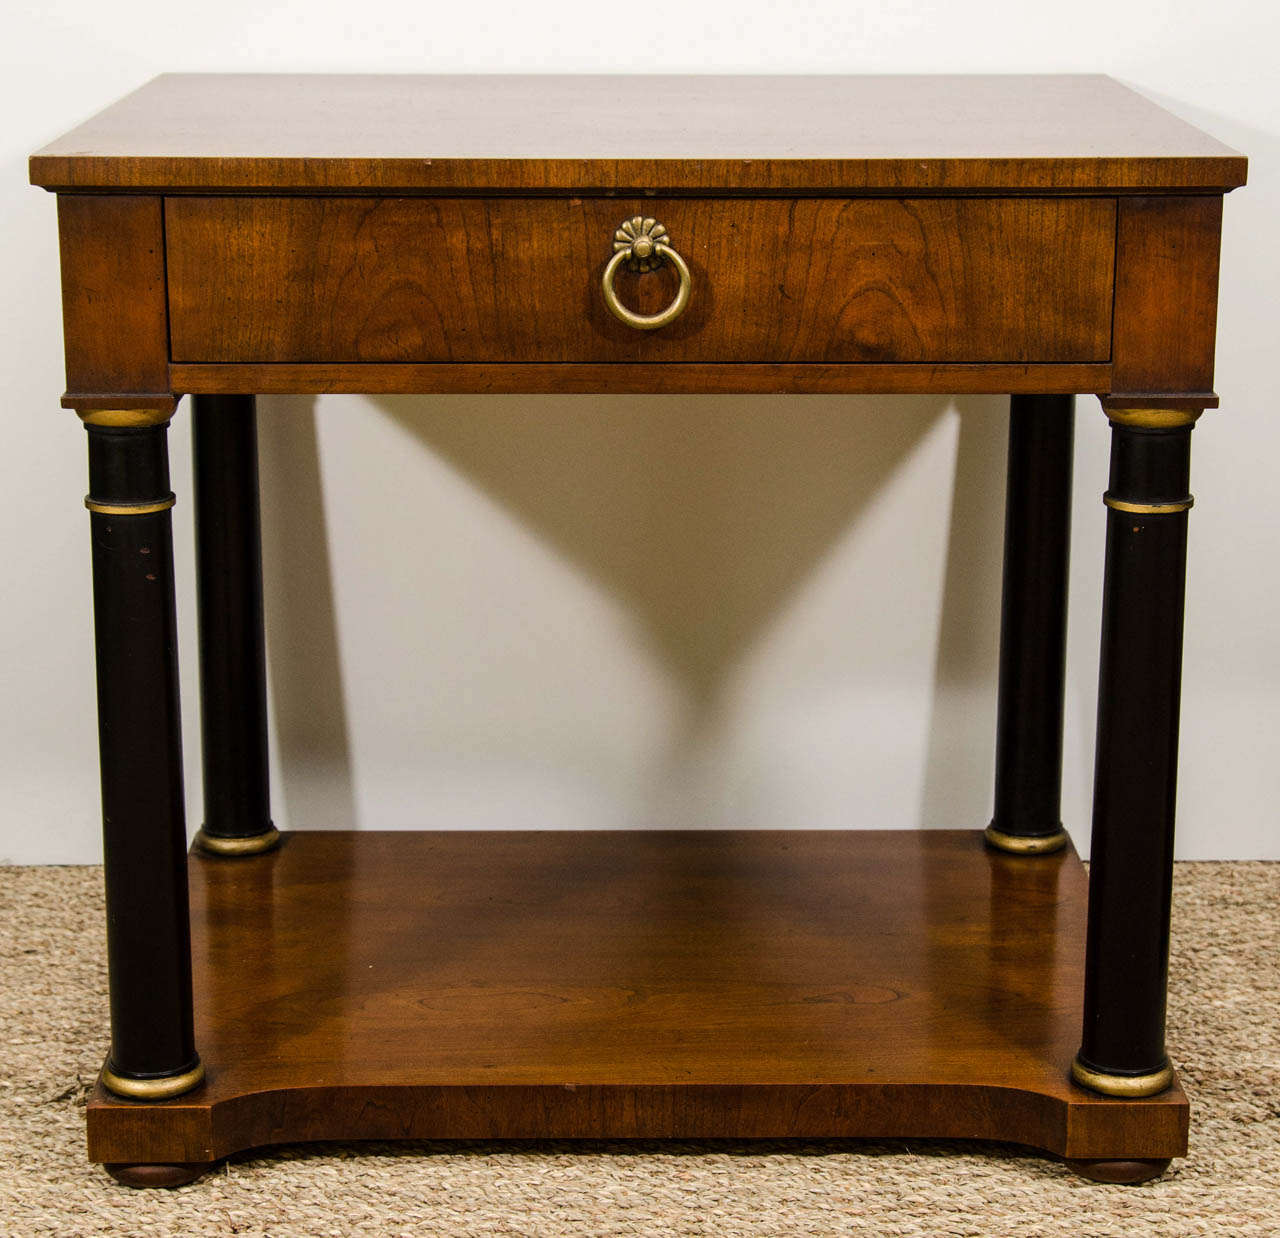 A pair of neoclassical style small side tables in mahogany with ebonized and parcel gilt columns.  Each table has one drawer and a lower shelf.